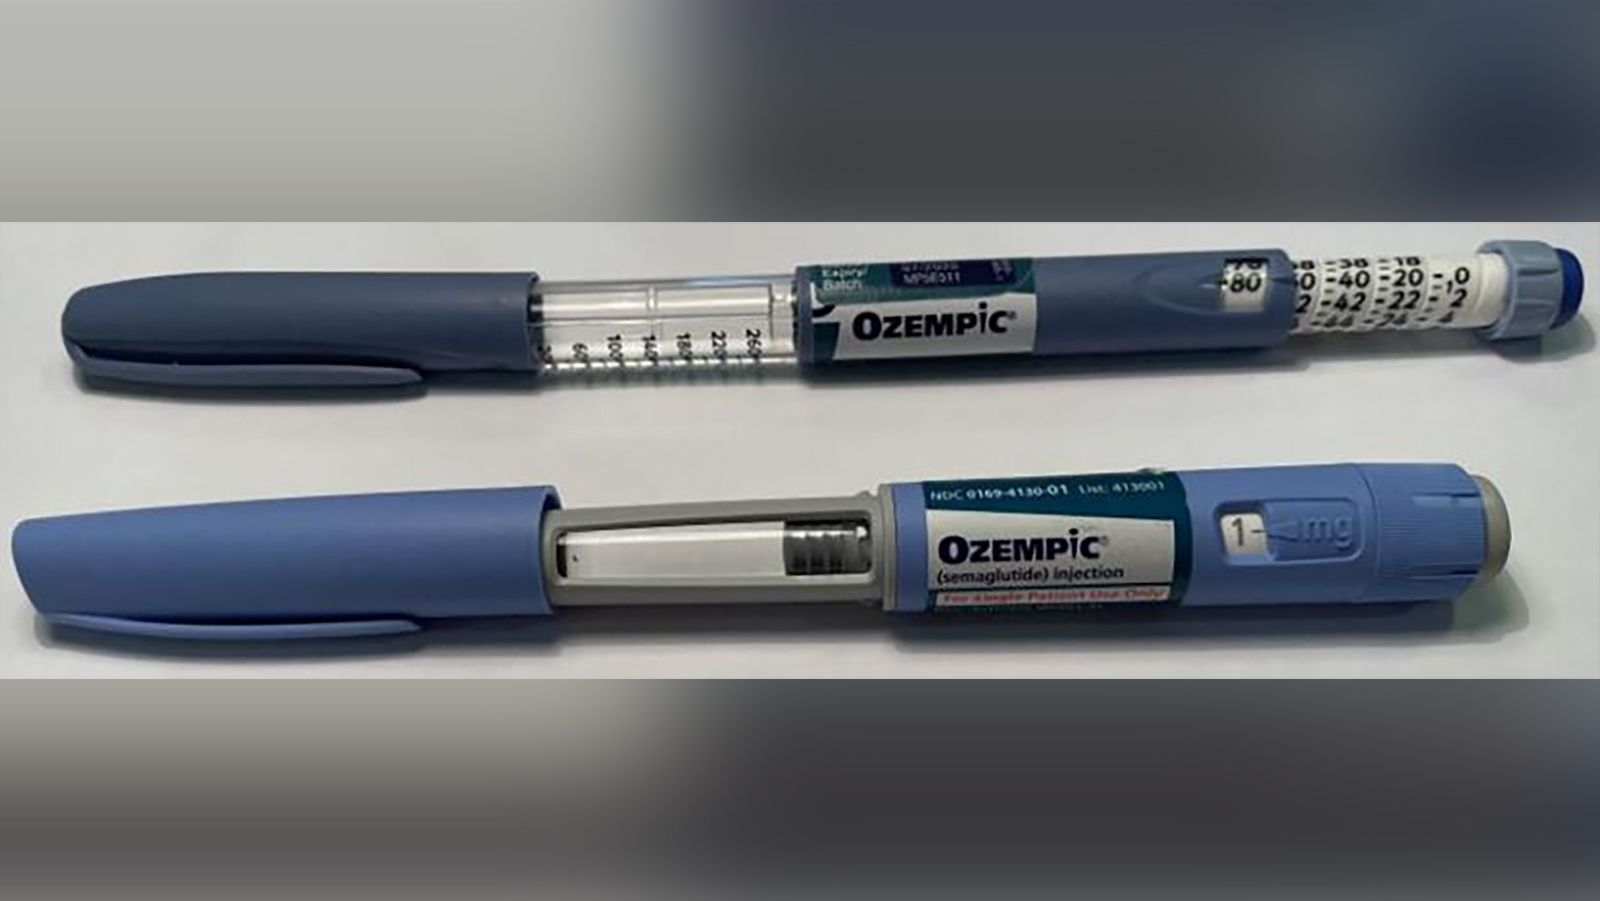 FDA warns of risk of infection from counterfeit Ozempic injections